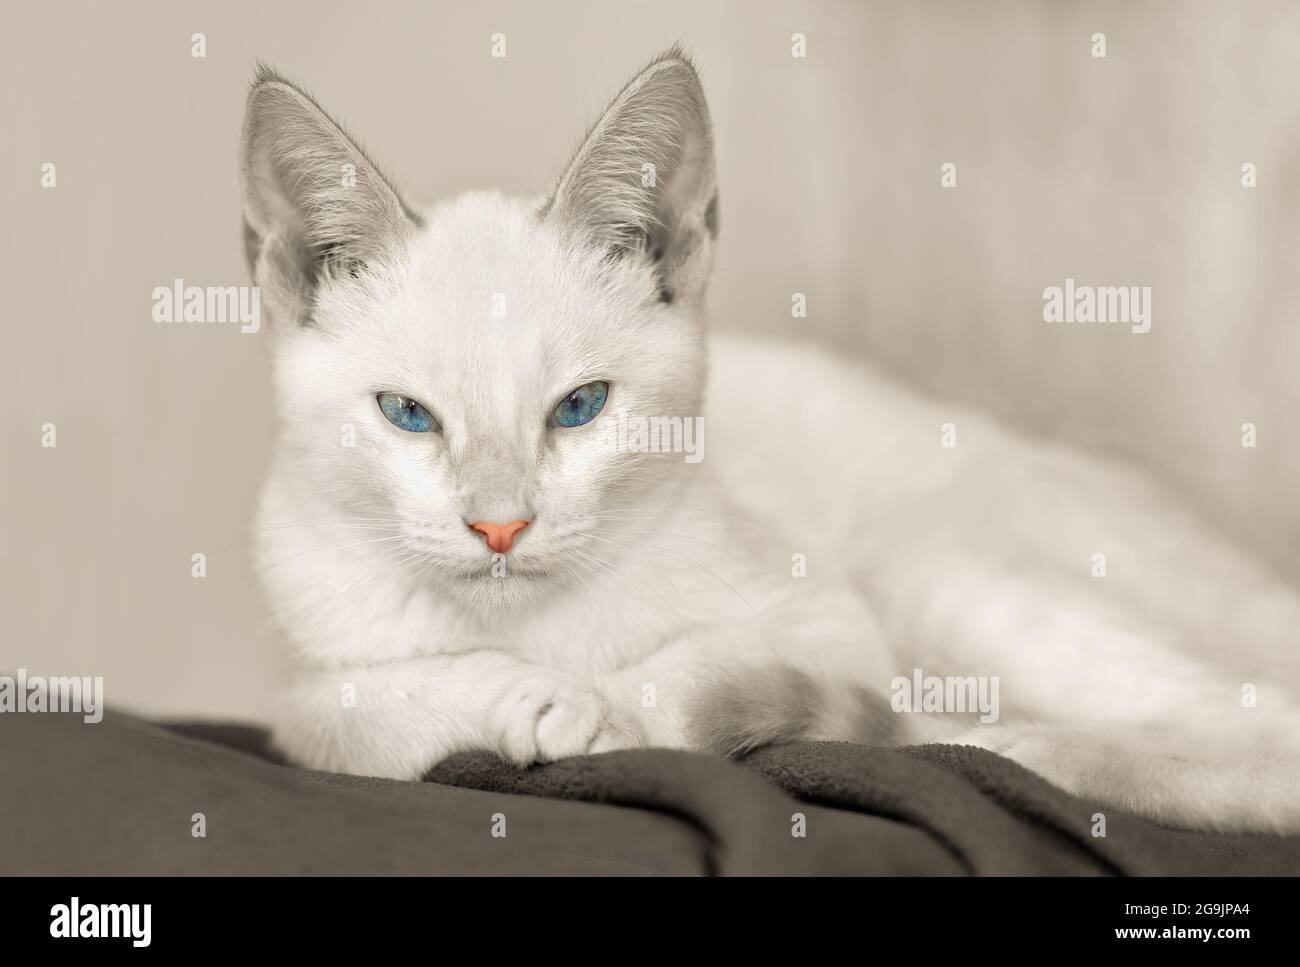 A White kitten Is Staring Straight Ahead In Black And White Colorized Image Format Stock Photo